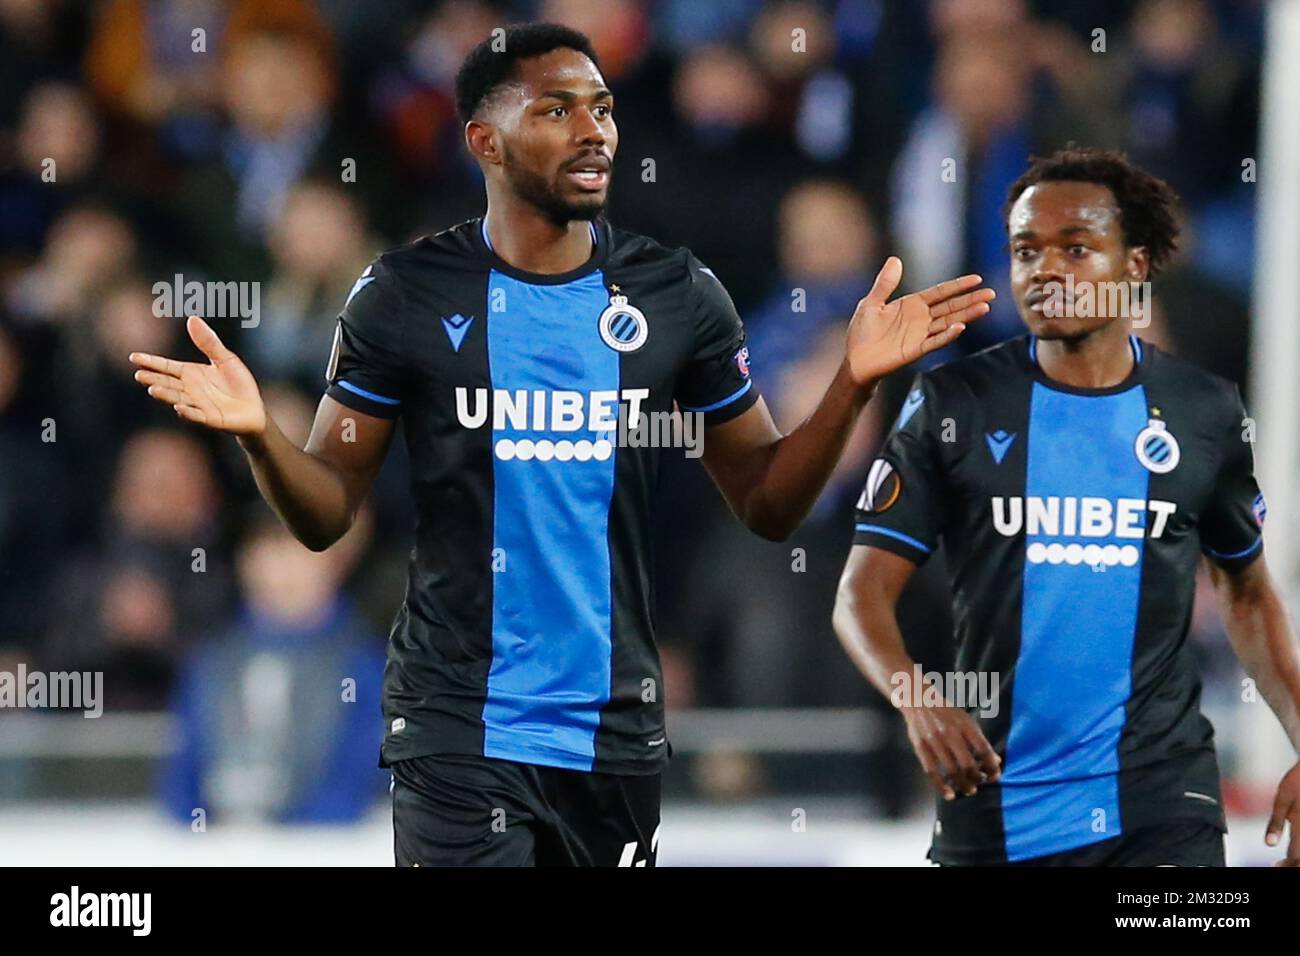 Club's Emmanuel Bonaventure Dennis celebrates after scoring during a game of the 1/16 finals of the UEFA Europa League between Belgian soccer club Club Brugge and English club Manchetser United, in Brugge, Thursday 20 February 2020. BELGA PHOTO Stock Photo